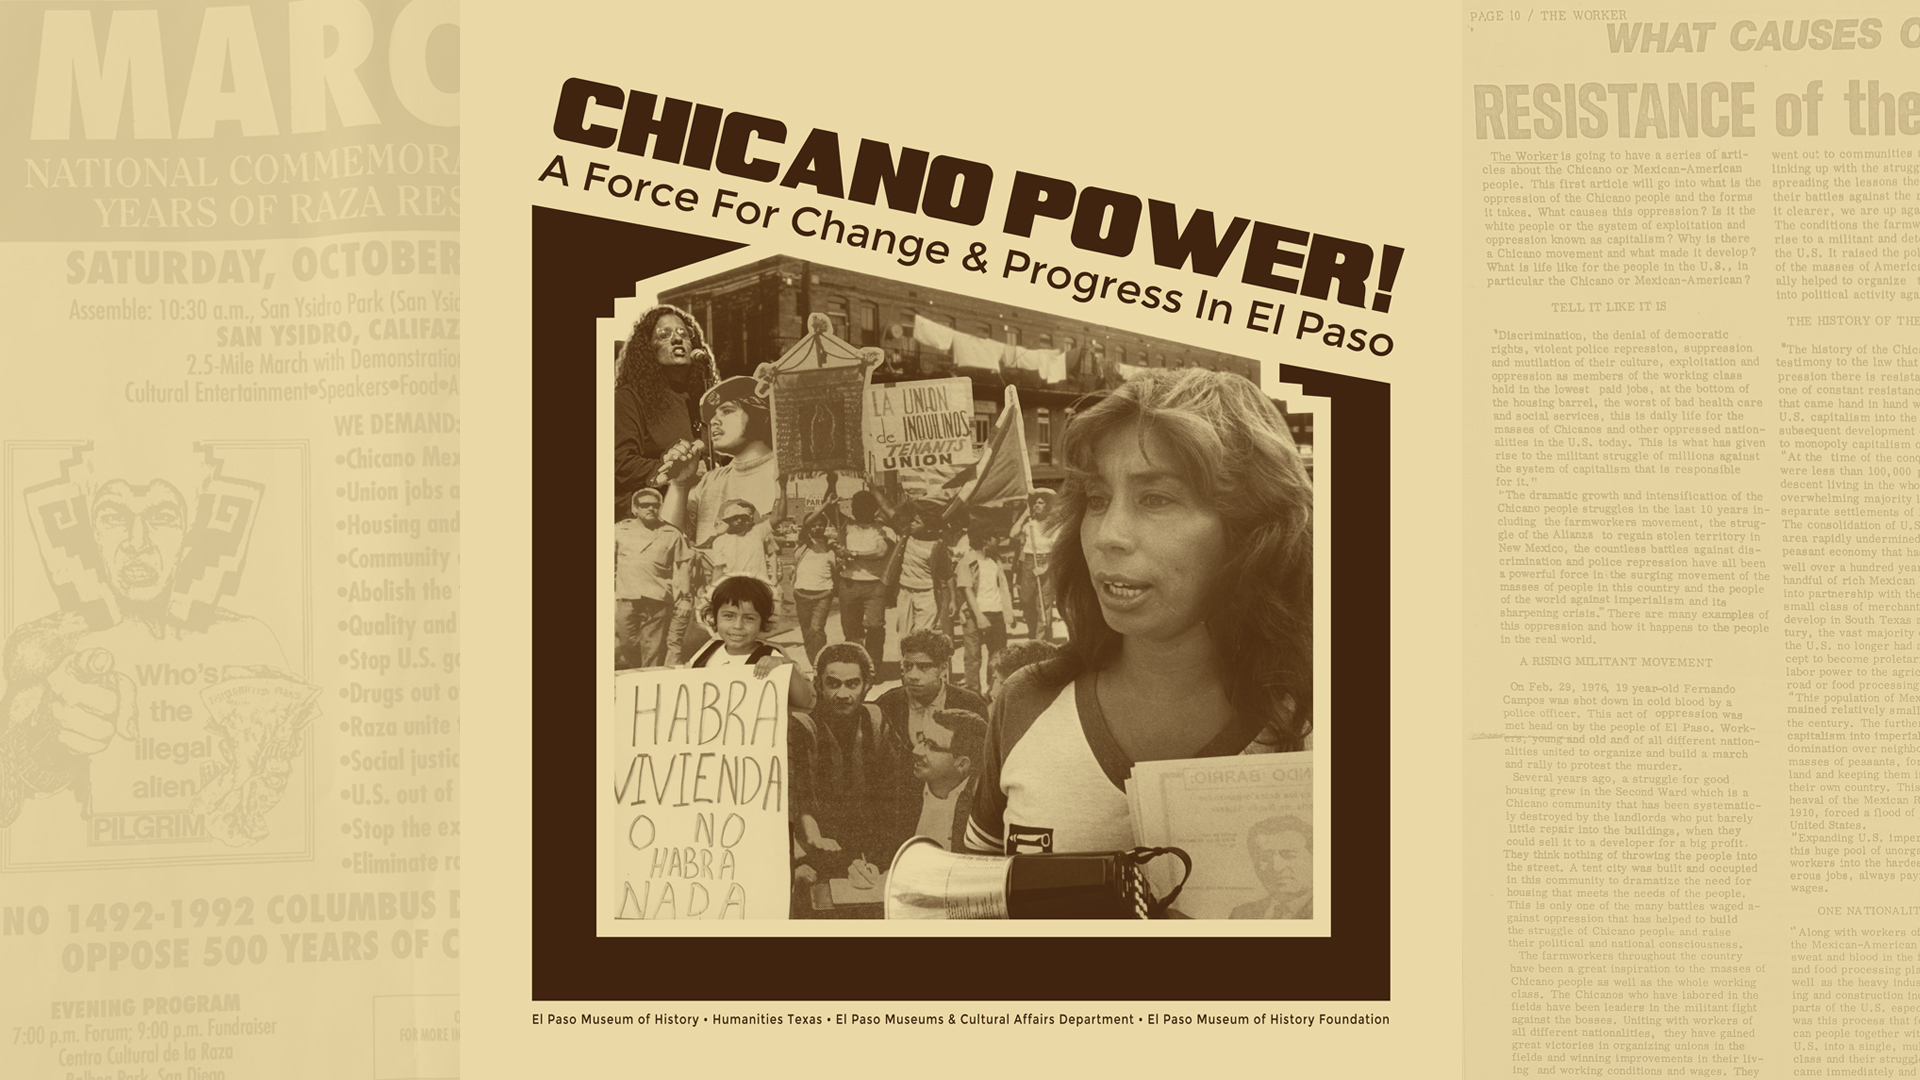 Chicano Power! A Force For Change & Progress In El Paso